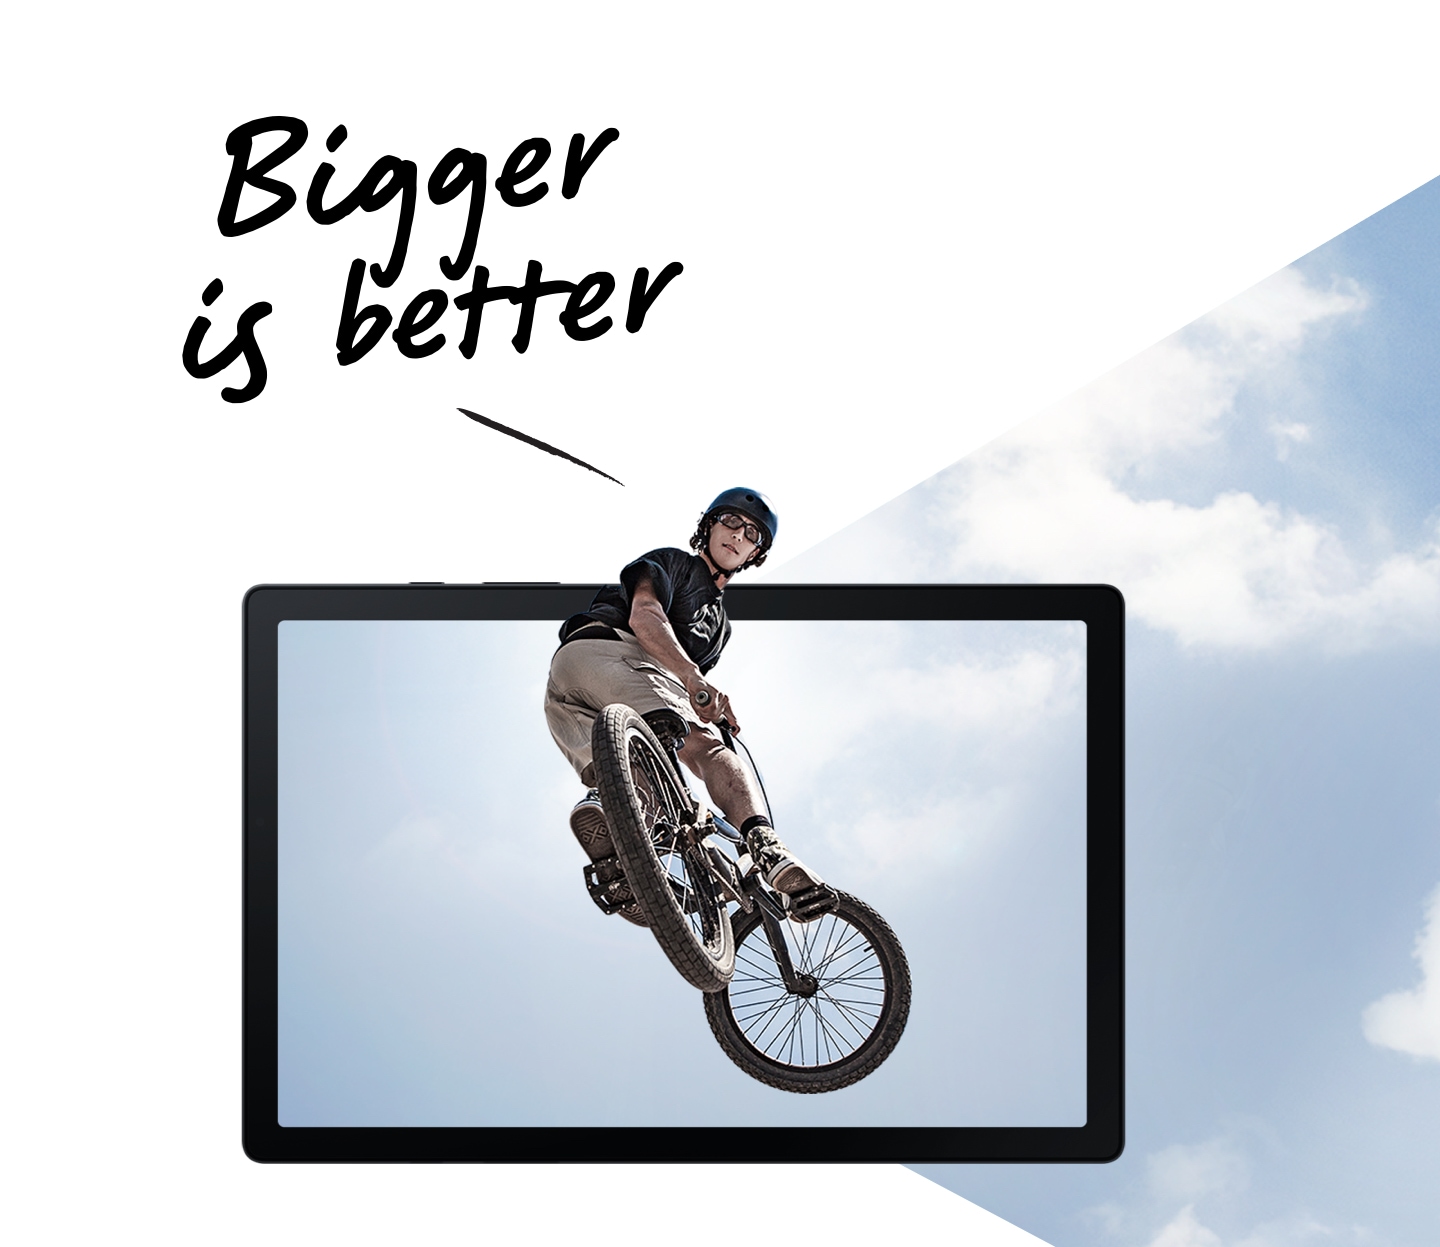 Tab A8 MLP featured Bigger is better immersive screen